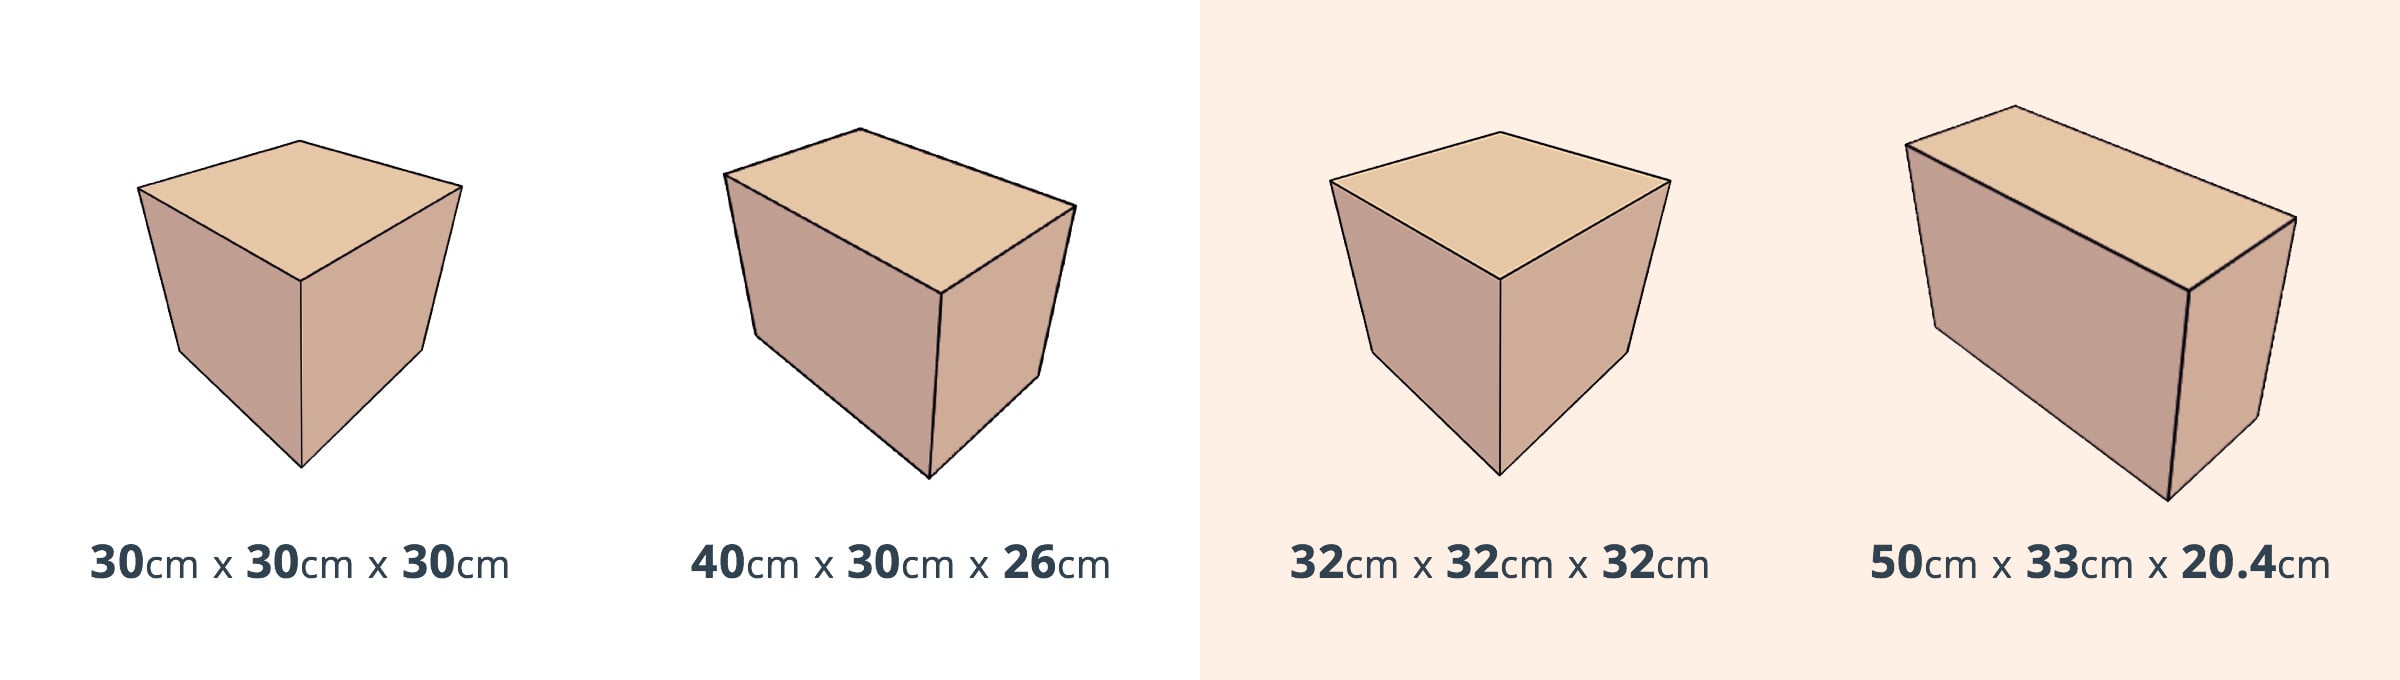 Carry-on size packaging dimensions